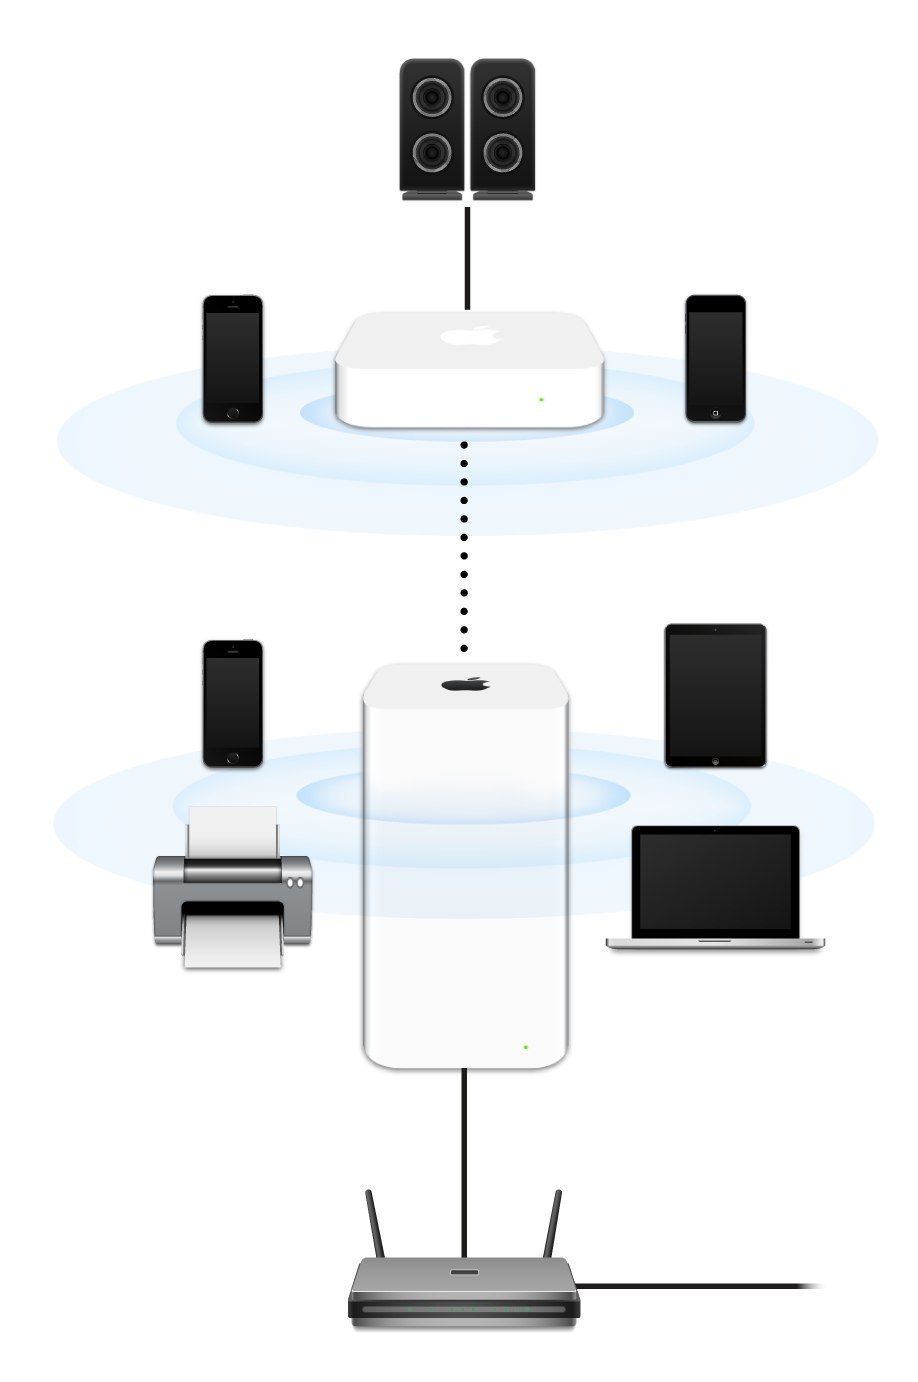 An extended network, including an AirPort Extreme and an AirPort Express, connected to a modem and transmitting to a variety of devices.